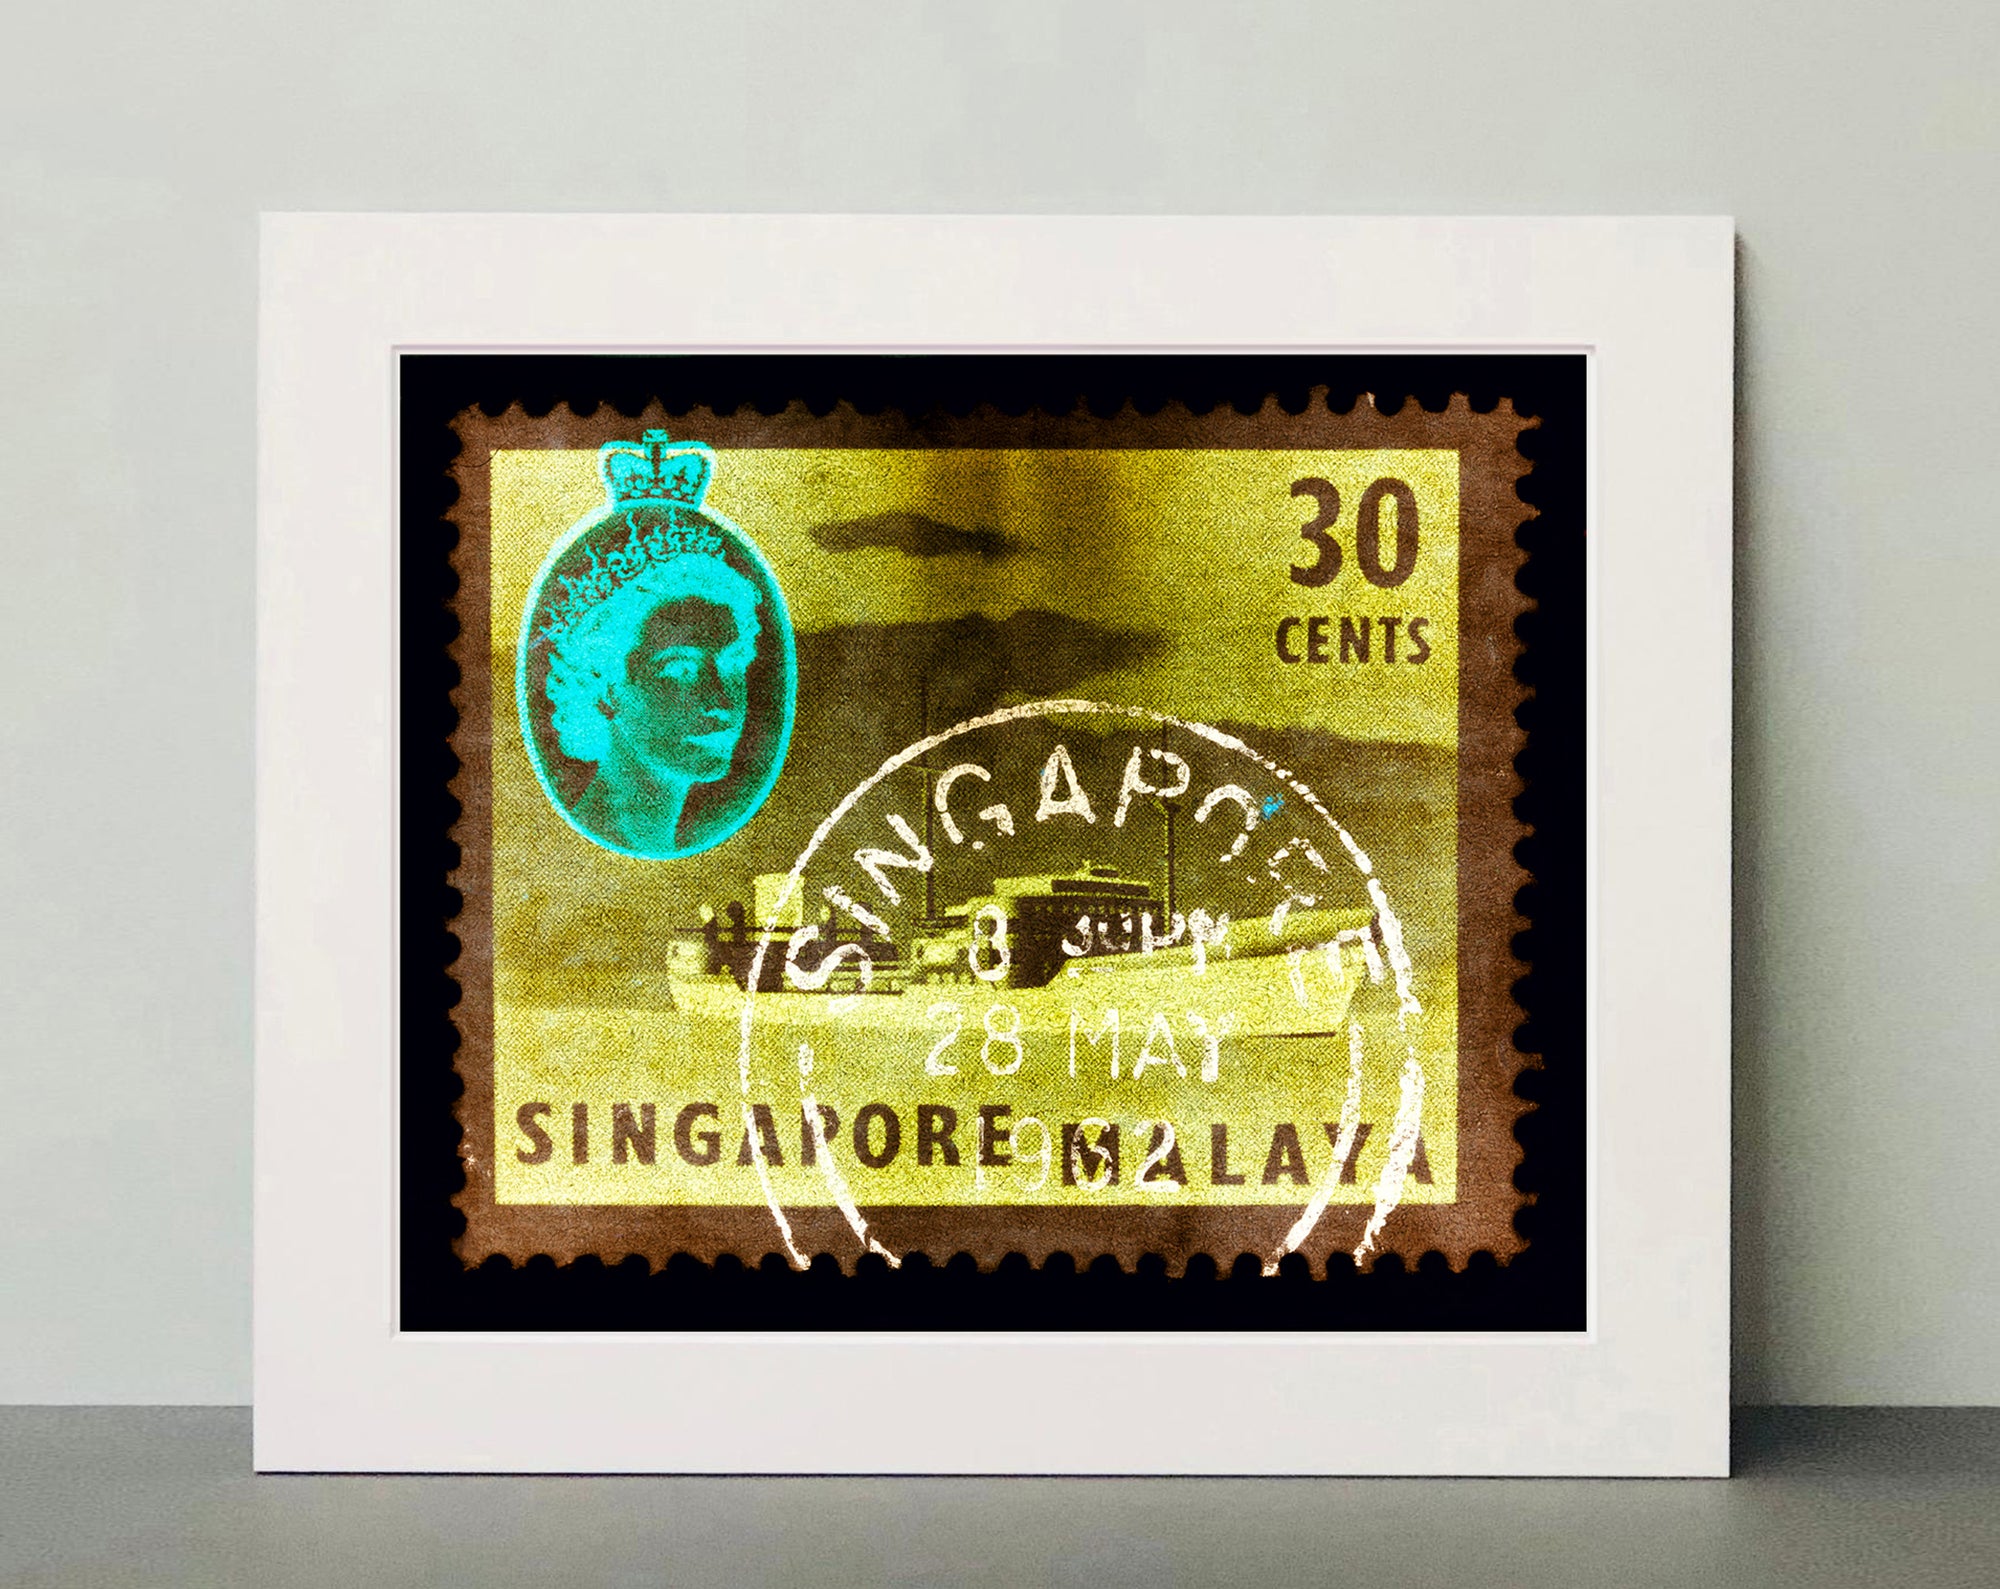 30 cents QEII Oil Tanker (Khaki). These historic postage stamps that make up the Heidler & Heeps Stamp Collection, Singapore Series “Postcards from Afar” have been given a twenty-first century pop art lease of life. The fine detailed tapestry of the original small postage stamp has been brought to life, made unique by the franking stamp and Heidler & Heeps specialist darkroom process.